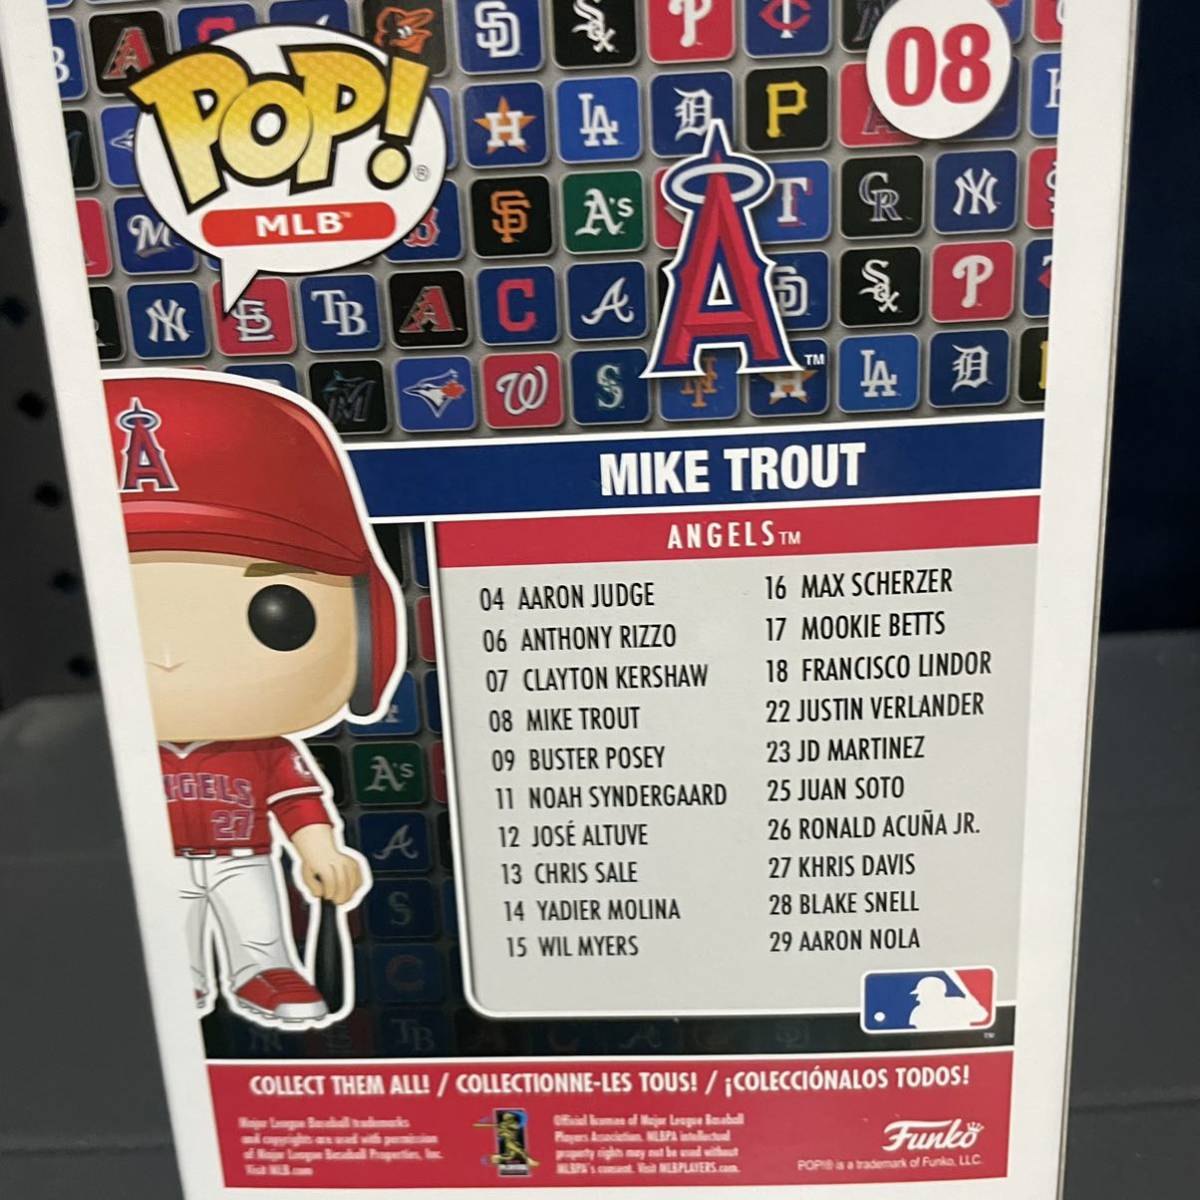 [ domestic not yet sale ] new goods Mike * trout Funko pop MLB New Jersy figure Mike Trout 08 Los Angeles enzerusLos Angeles Angels